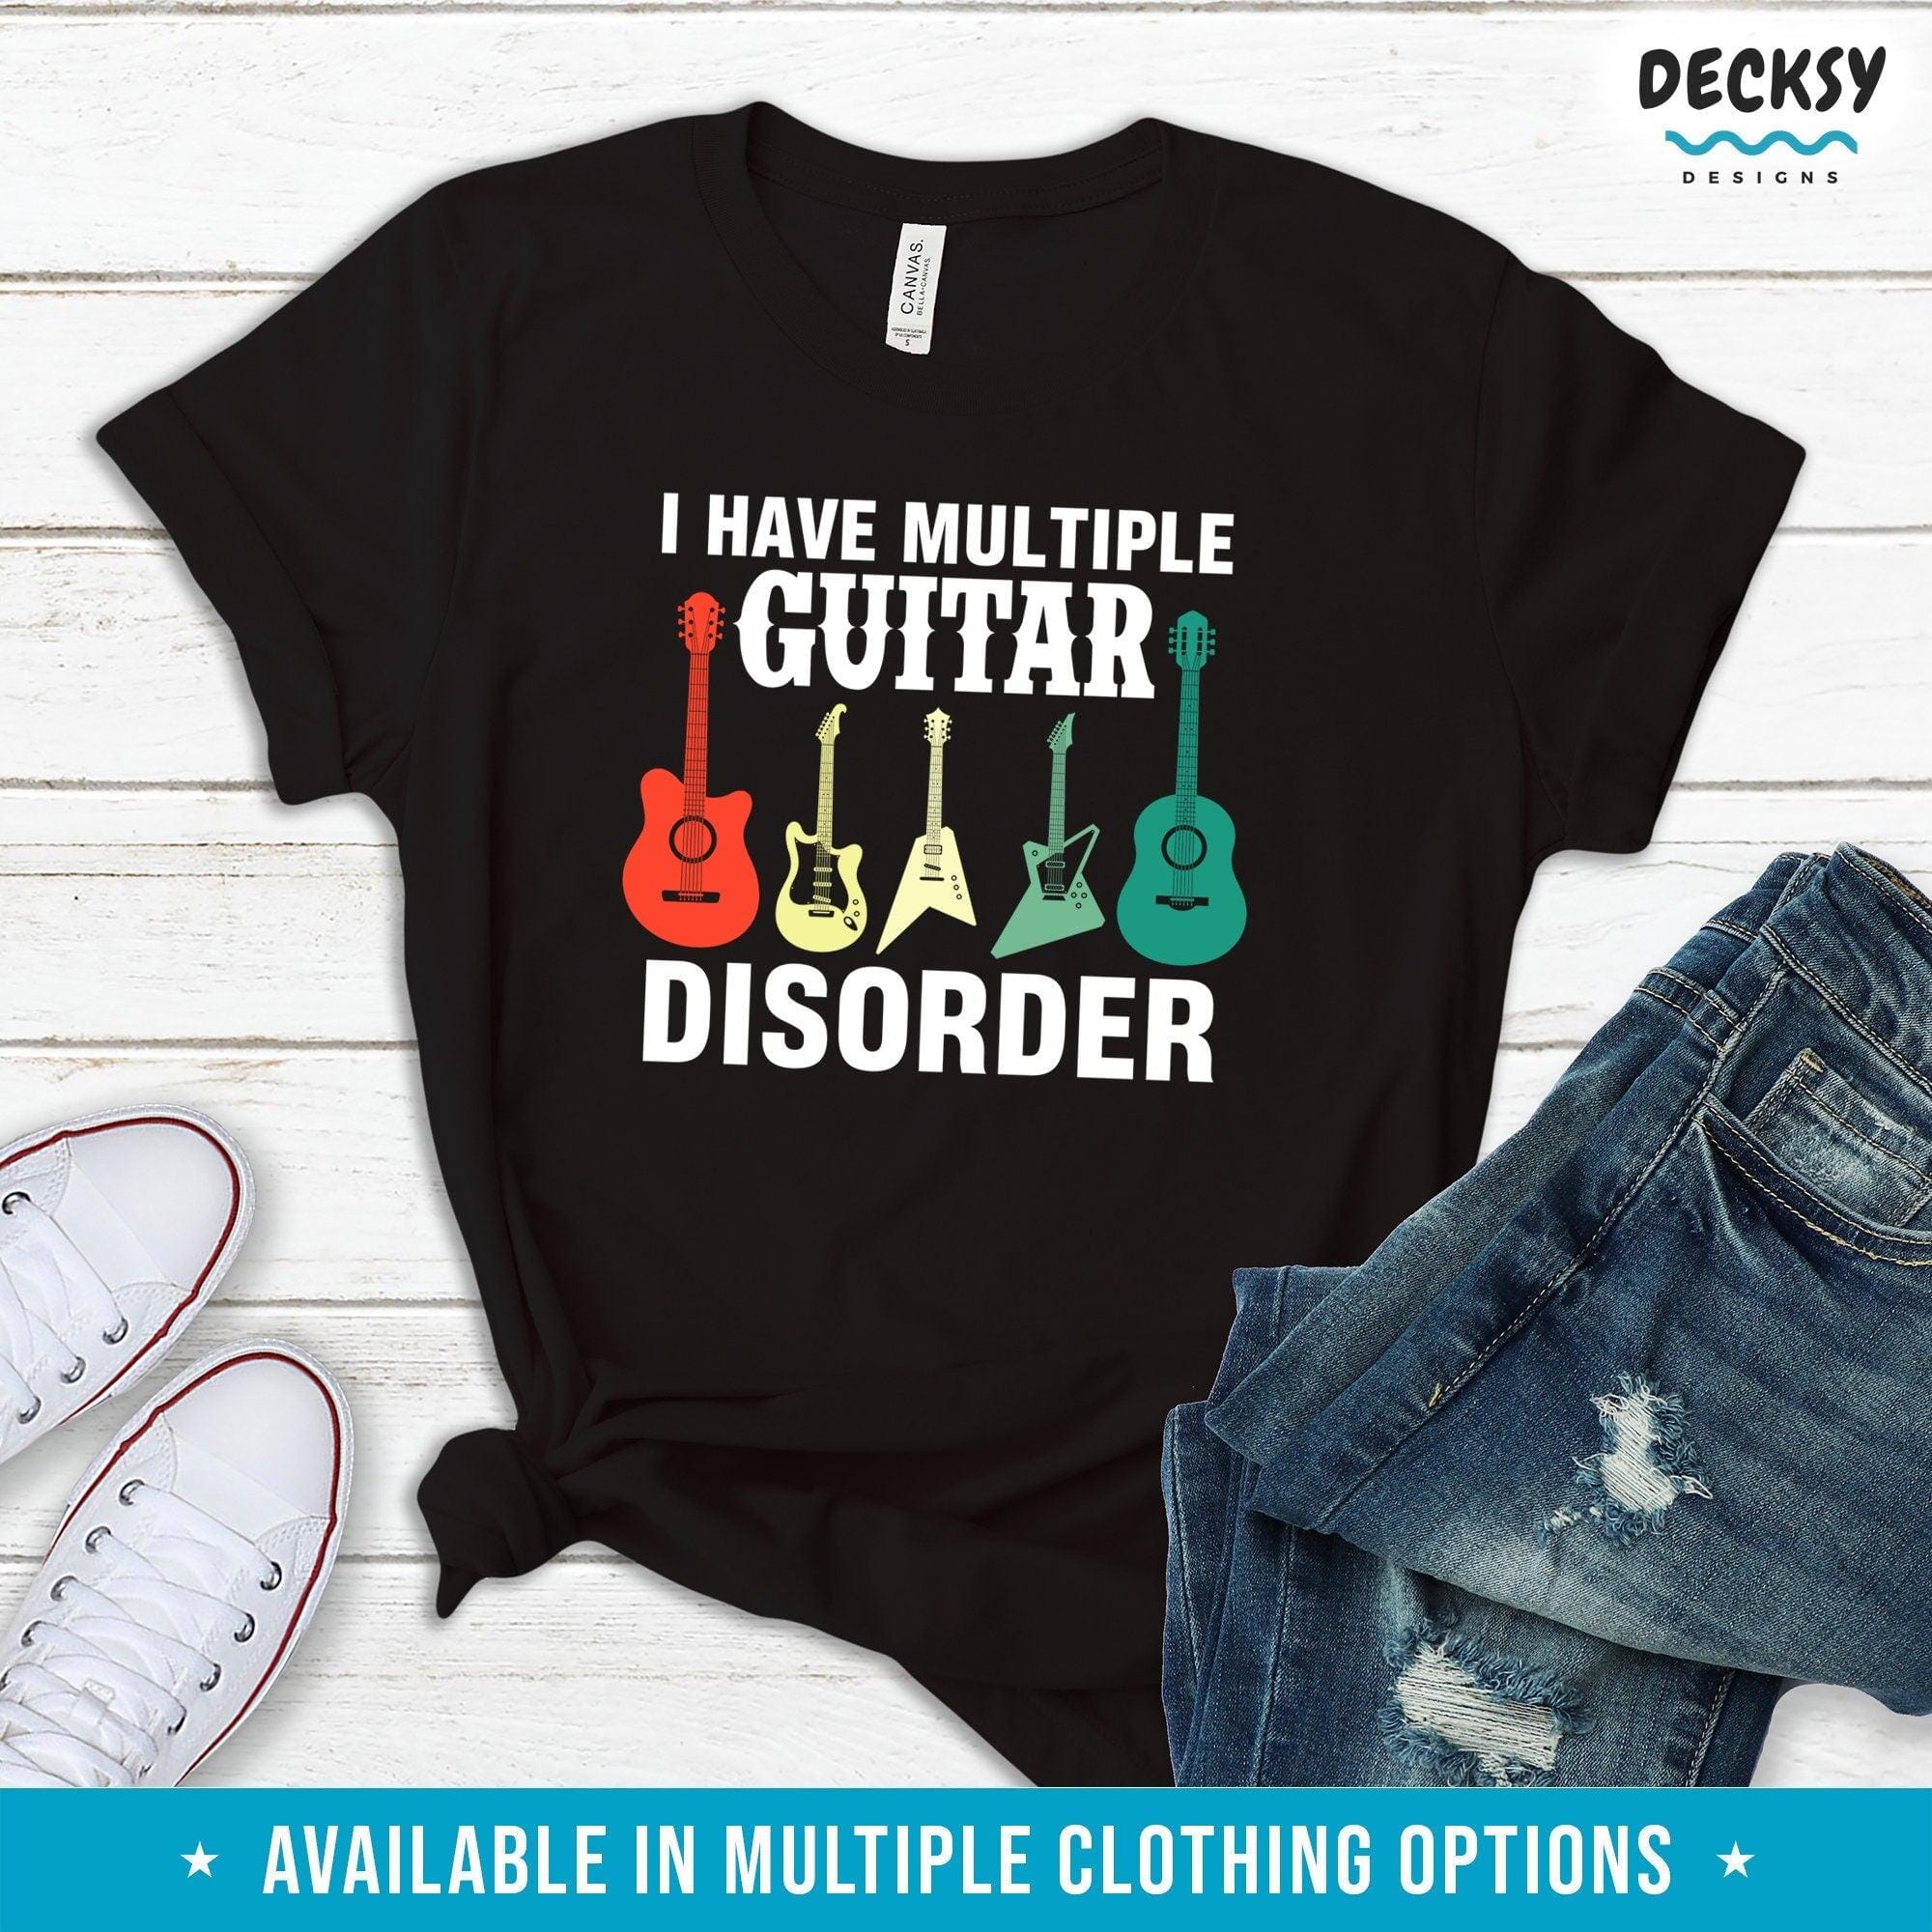 Guitar Player Shirt, Gift for Musician-Clothing:Gender-Neutral Adult Clothing:Tops & Tees:T-shirts:Graphic Tees-DecksyDesigns